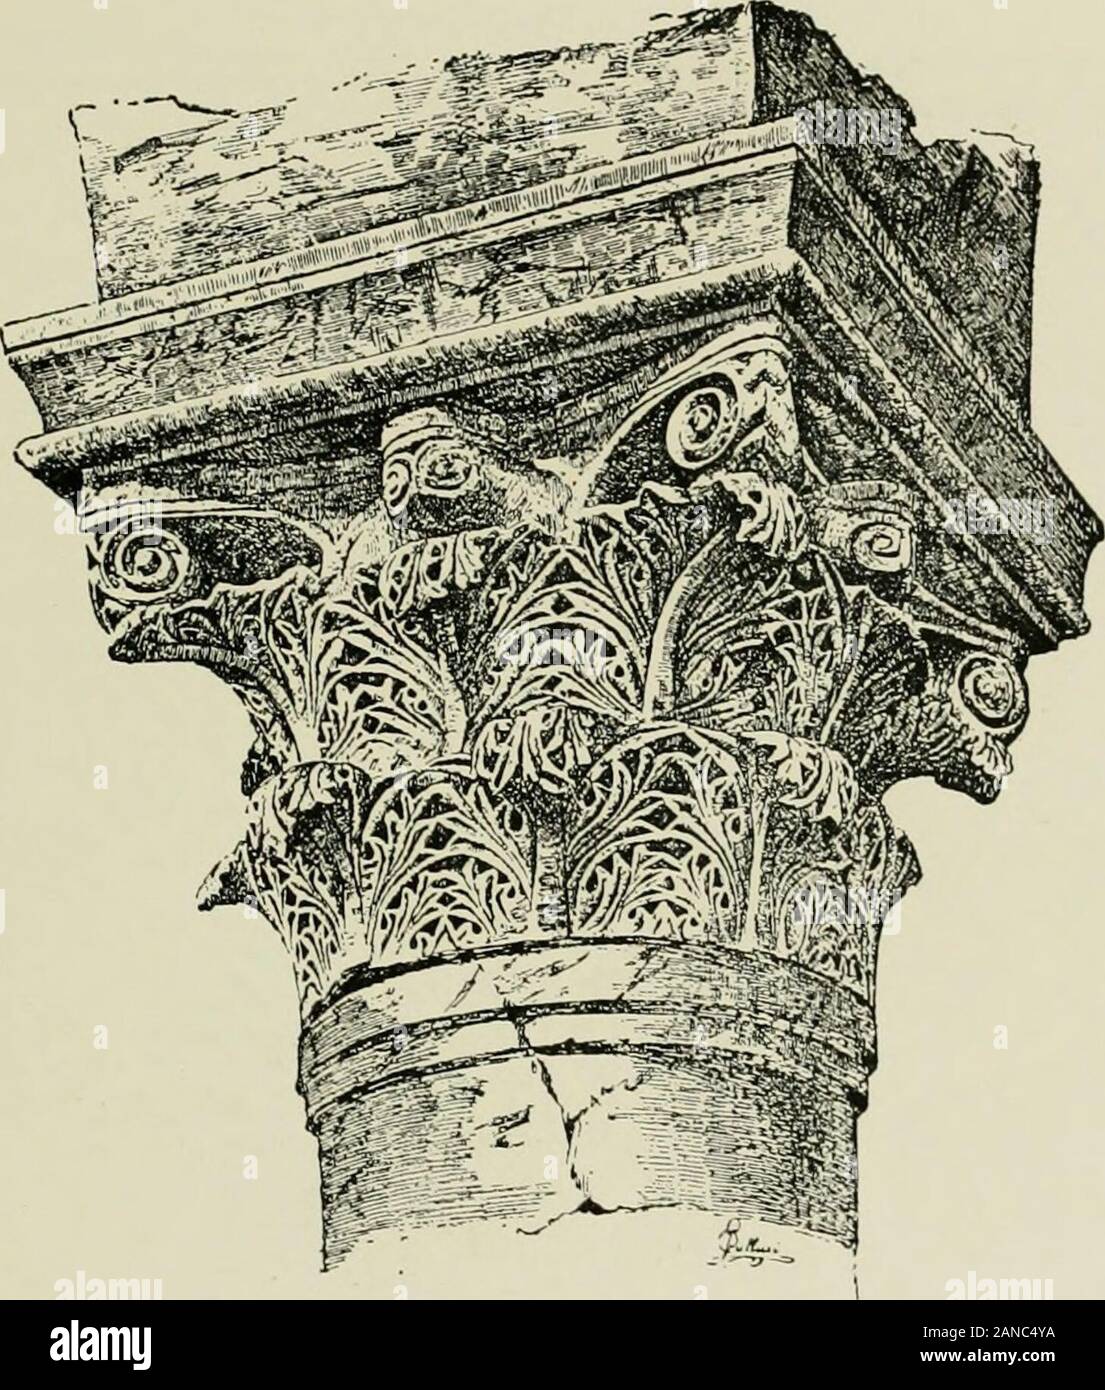 Architecture in Italy, from the sixth to the eleventh century; historical and critical researches . Fig. 161.—Capital from the Naves of the Cathedral of Torcello—a.d. 1008. one which is of the sixth century, work of the year 1008, andhave so perfect an analogy with those of the S. Mark ofOrseolos time which we have already seen, as to make it quiteuseless to describe them. One alone differs, because it is animitation of the sixth century, a very original capital of com-posite style, which has a row of very elegant little trees instead of ji lower low ul loais. Here, all the capitals of the n Stock Photo